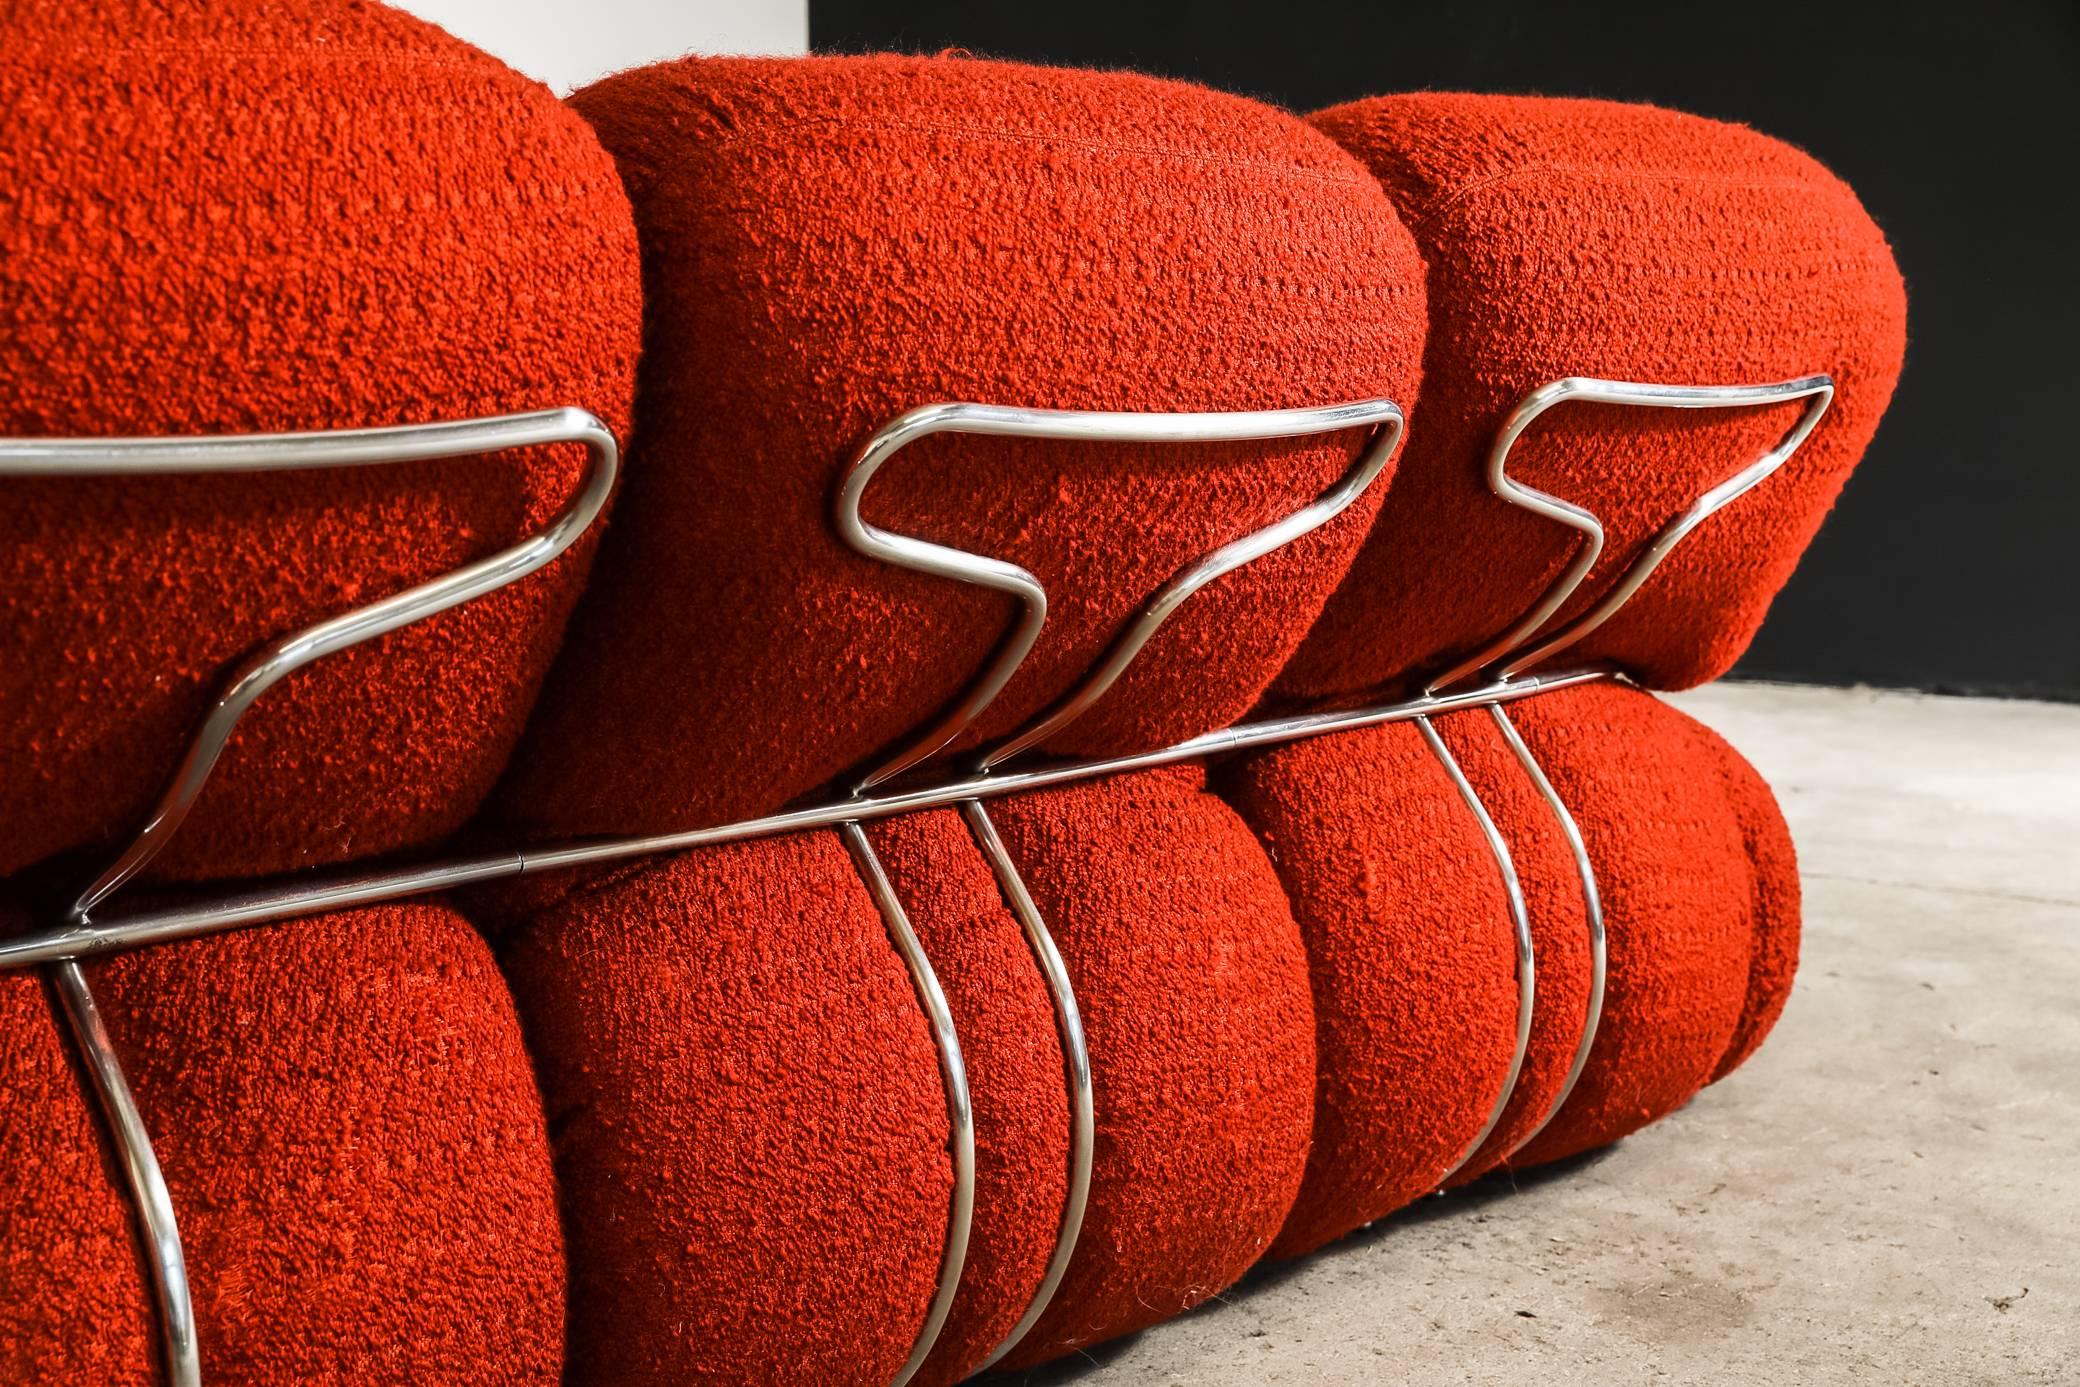 Italian Midcentury Red Wool Blend Sofa by Adriano Piazzesi, circa 1970